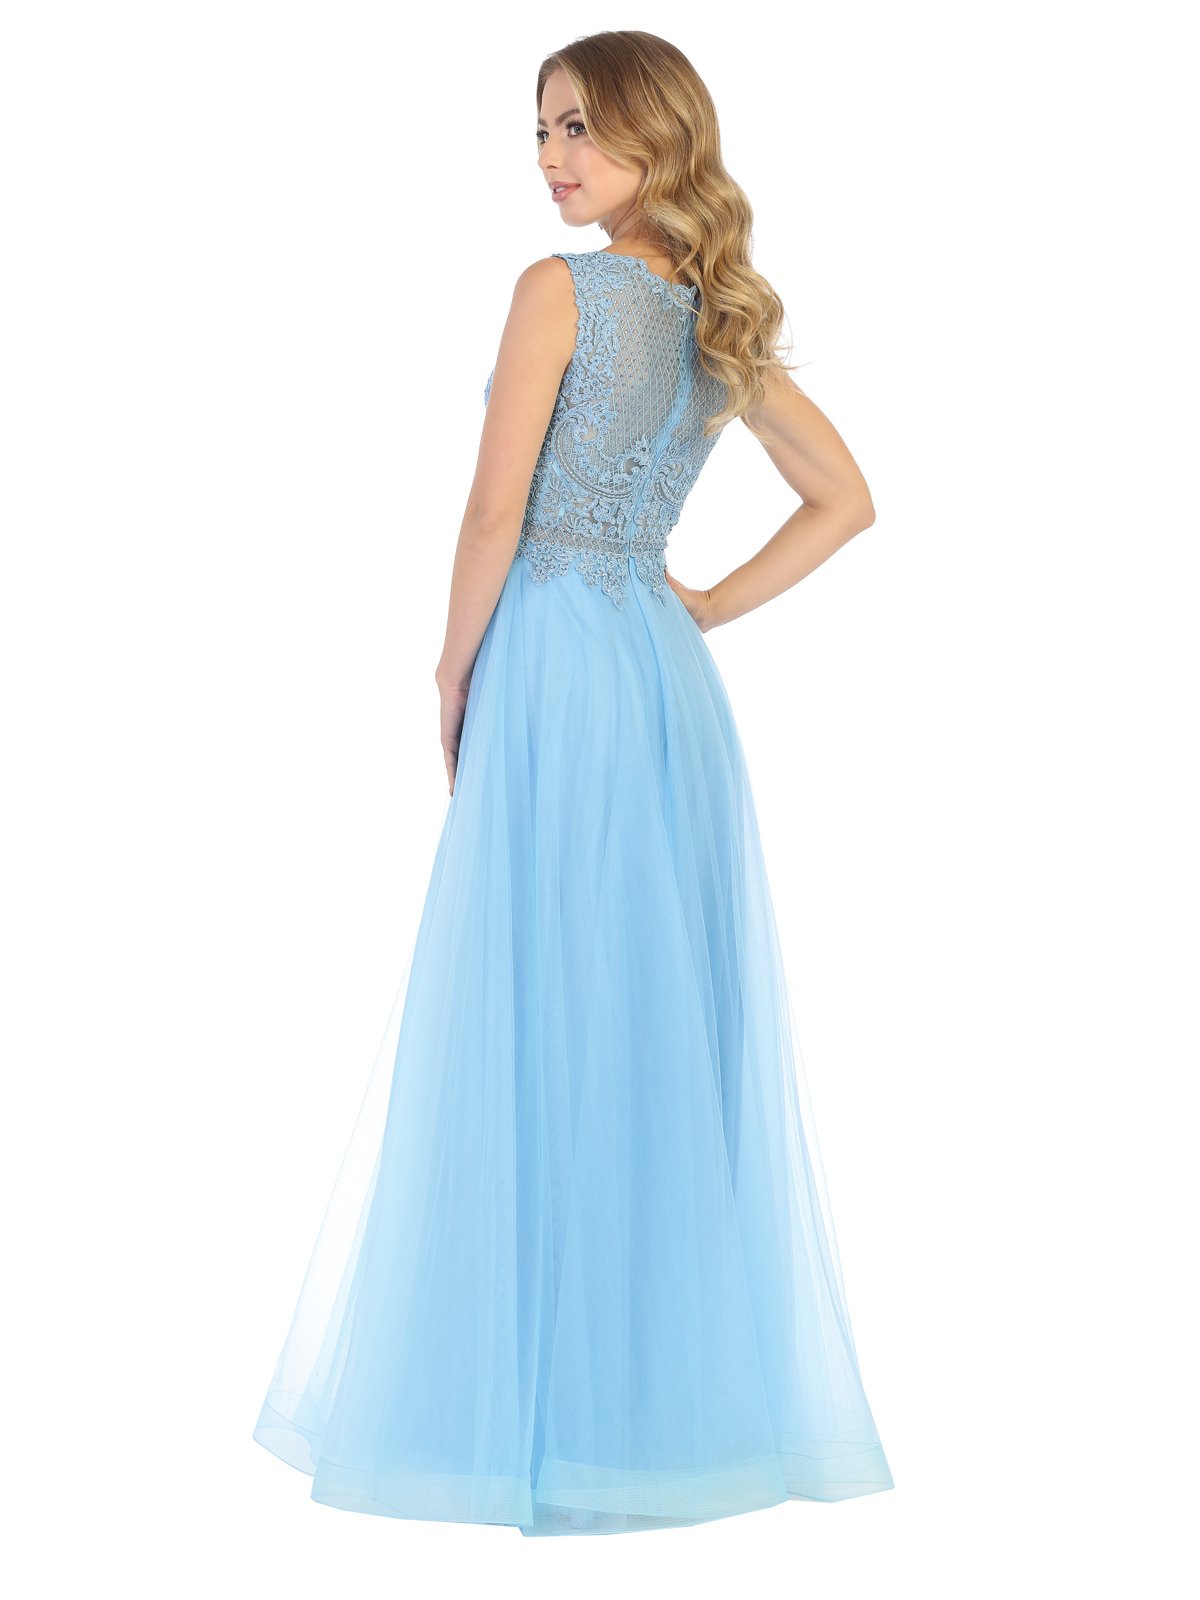 May Queen - MQ1717 Sheer Lattice Rendered Tulle Dress In Blue